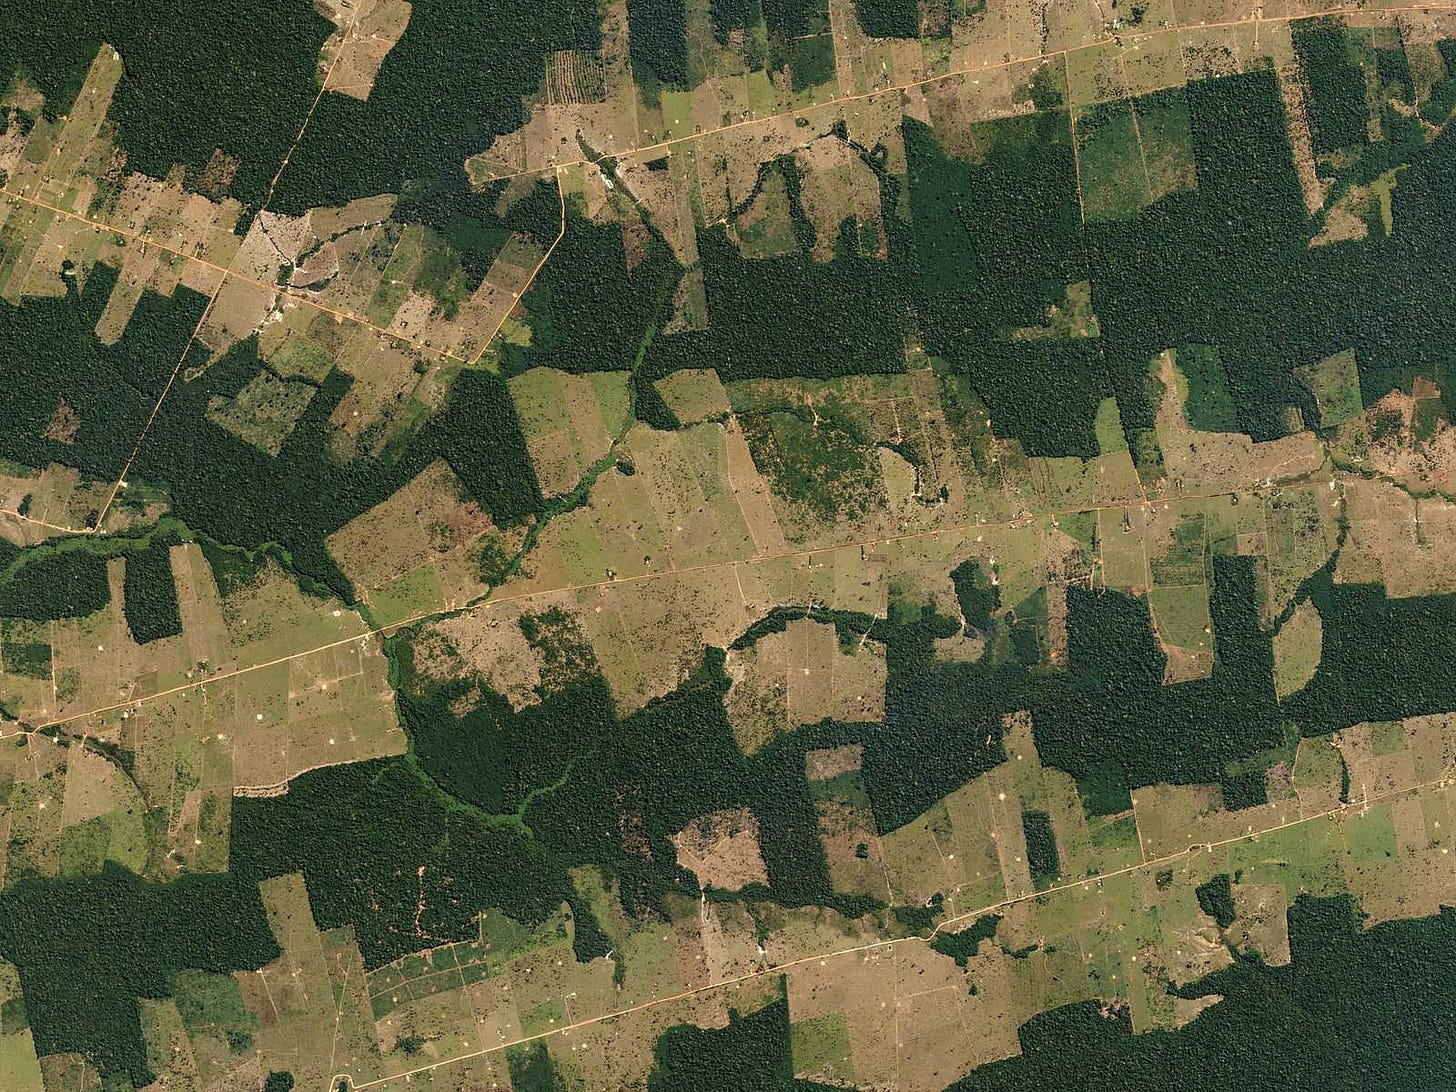 Farms and pastureland carve their way into tropical forestland in the Western Brazilian State of Rondônia.